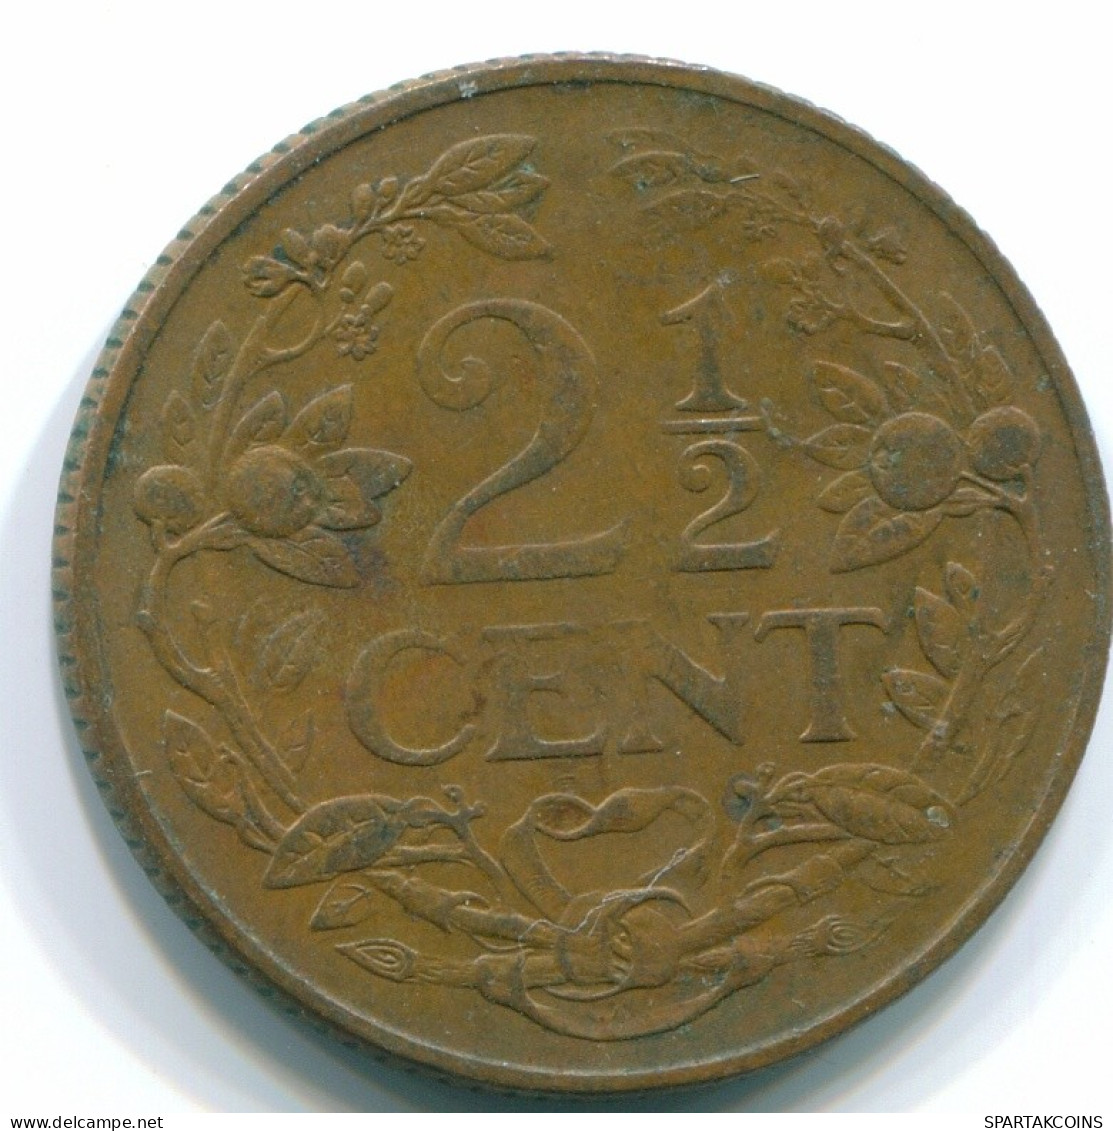 2 1/2 CENT 1965 CURACAO Netherlands Bronze Colonial Coin #S10198.U.A - Curacao